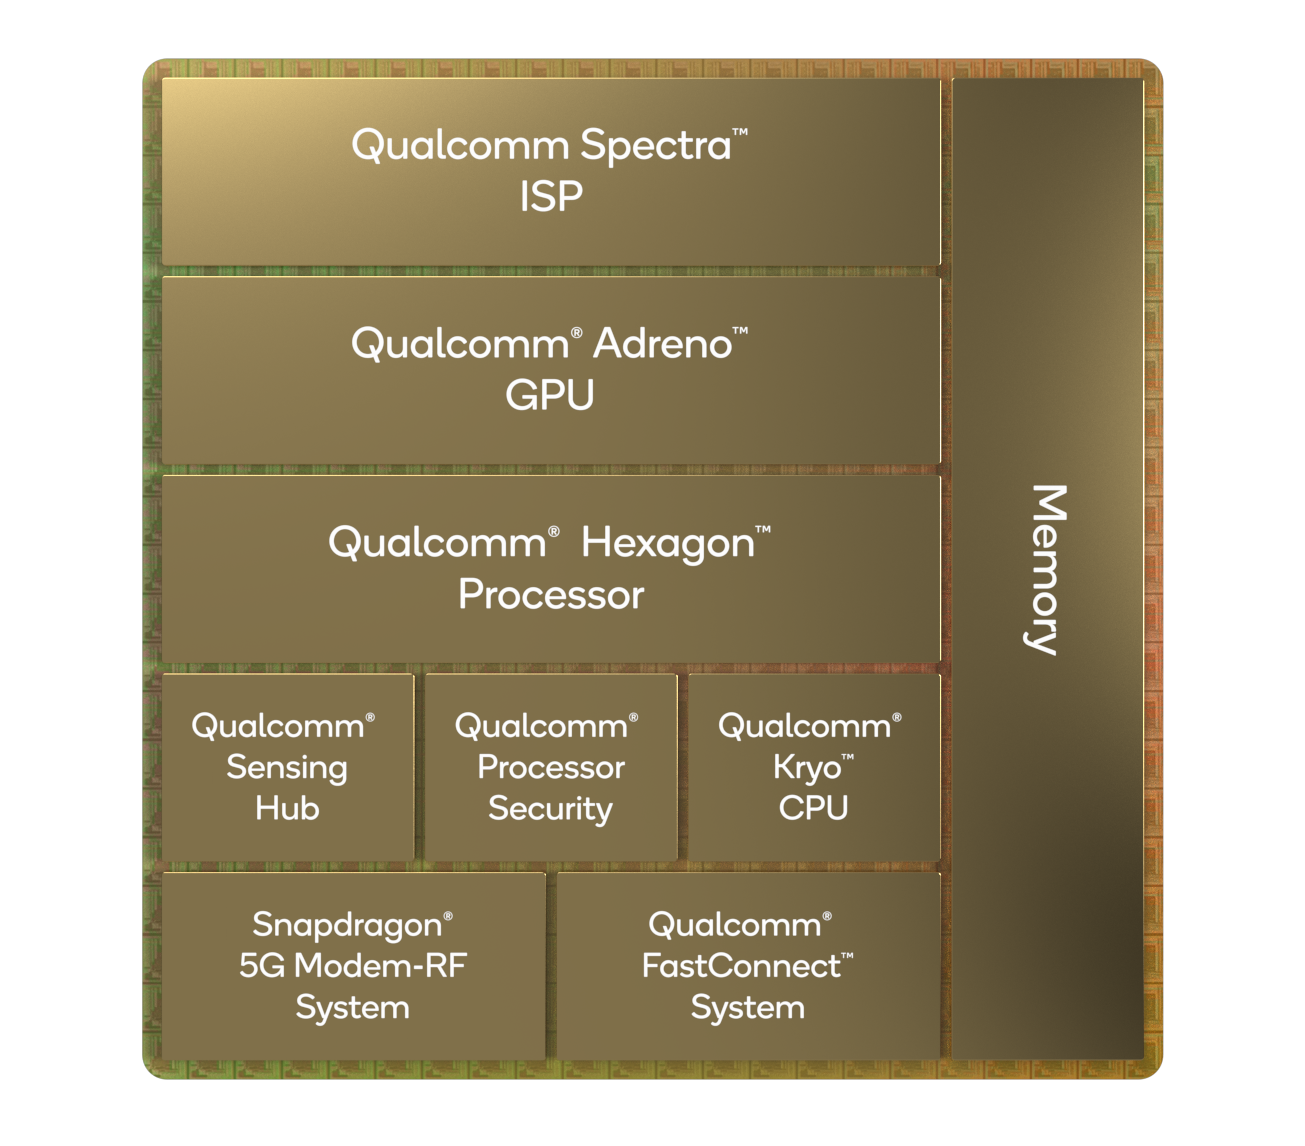 Qualcomm Snapdragon 8 Gen 3 - An Android Flagship Processor for